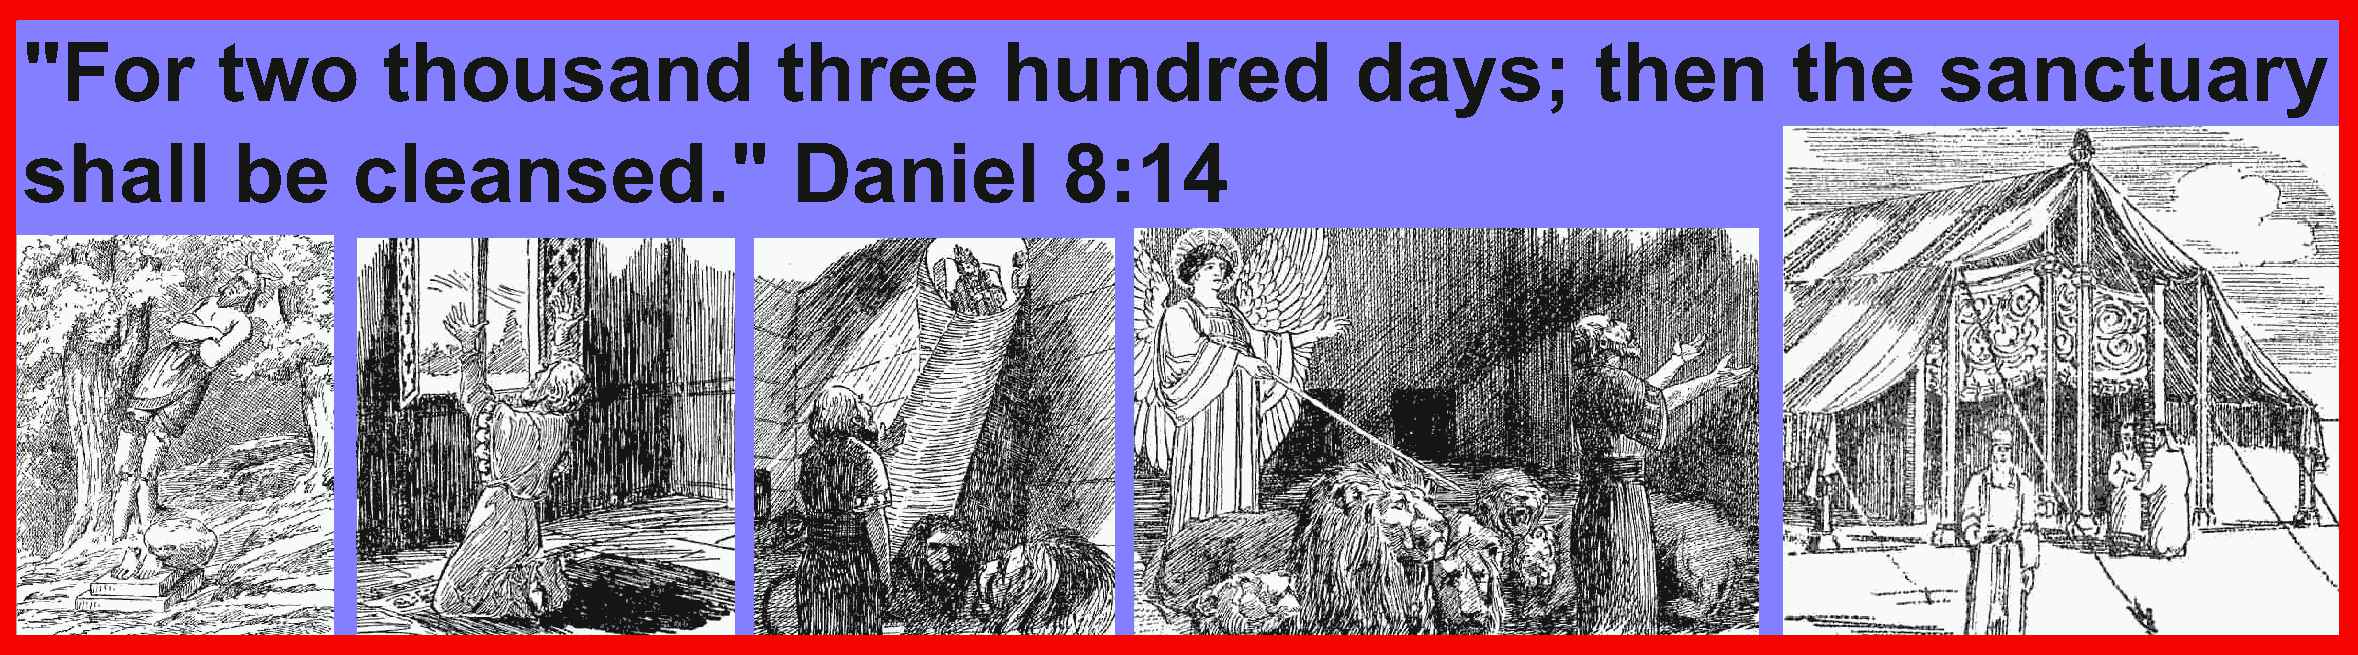 For two thousand three hundred days; then the sanctuary shall be cleansed. Daniel 8:14.